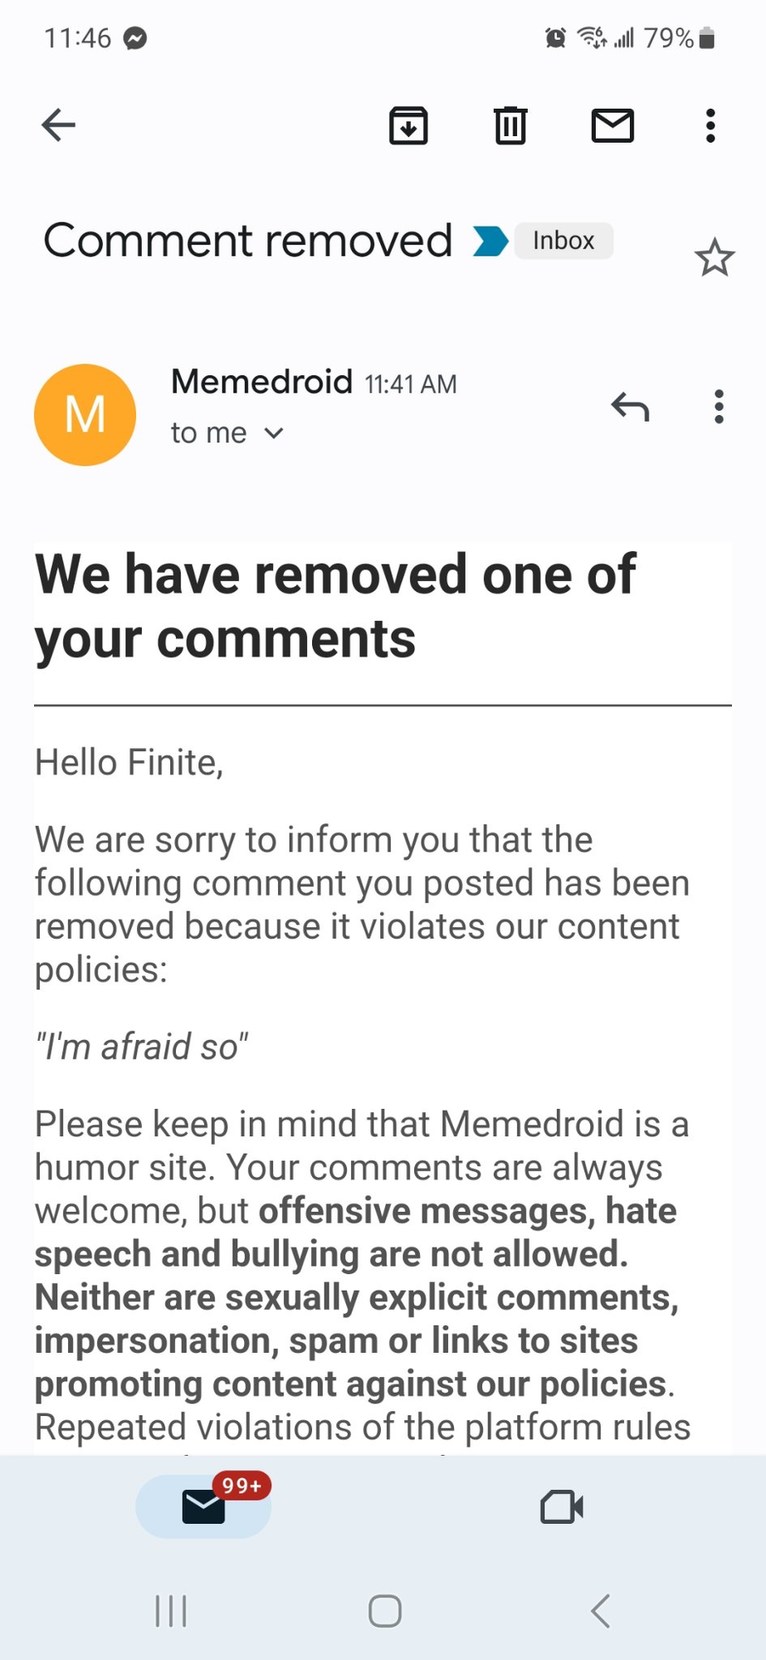 Memedroid is a joke at this point